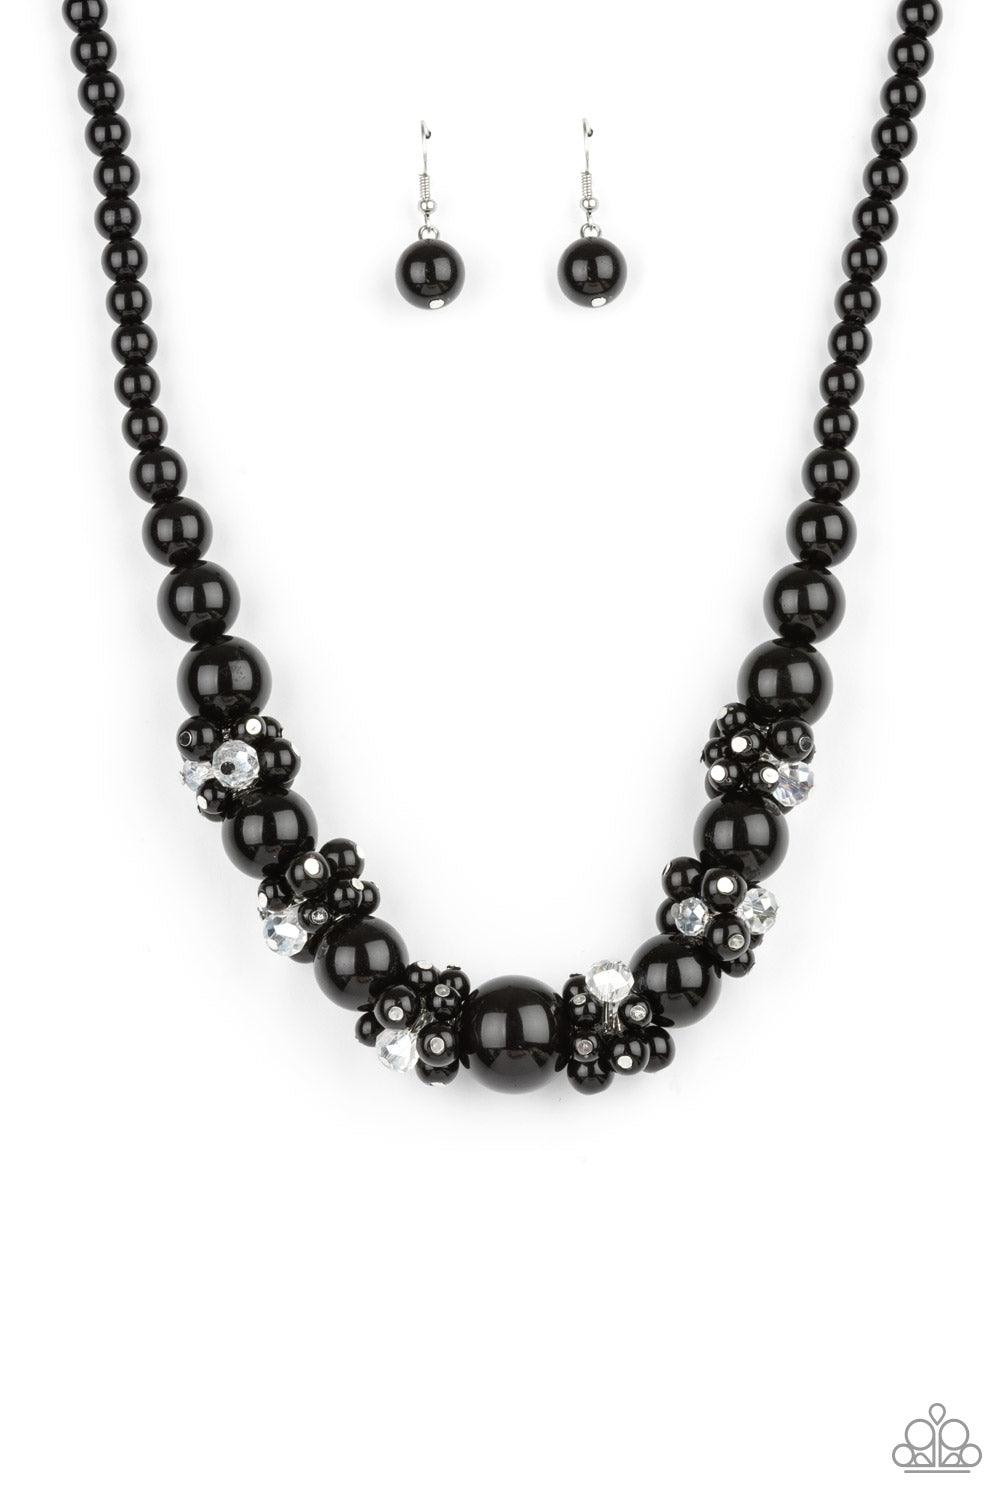 All Dolled UPSCALE - Black Necklaces dainty black beads and sparkly white crystal-like beads cluster between oversized black beads that are threaded along an invisible wire below the collar, creating a stunning centerpiece. Features an adjustable clasp closure.  Sold as one individual necklace. Includes one pair of matching earrings.